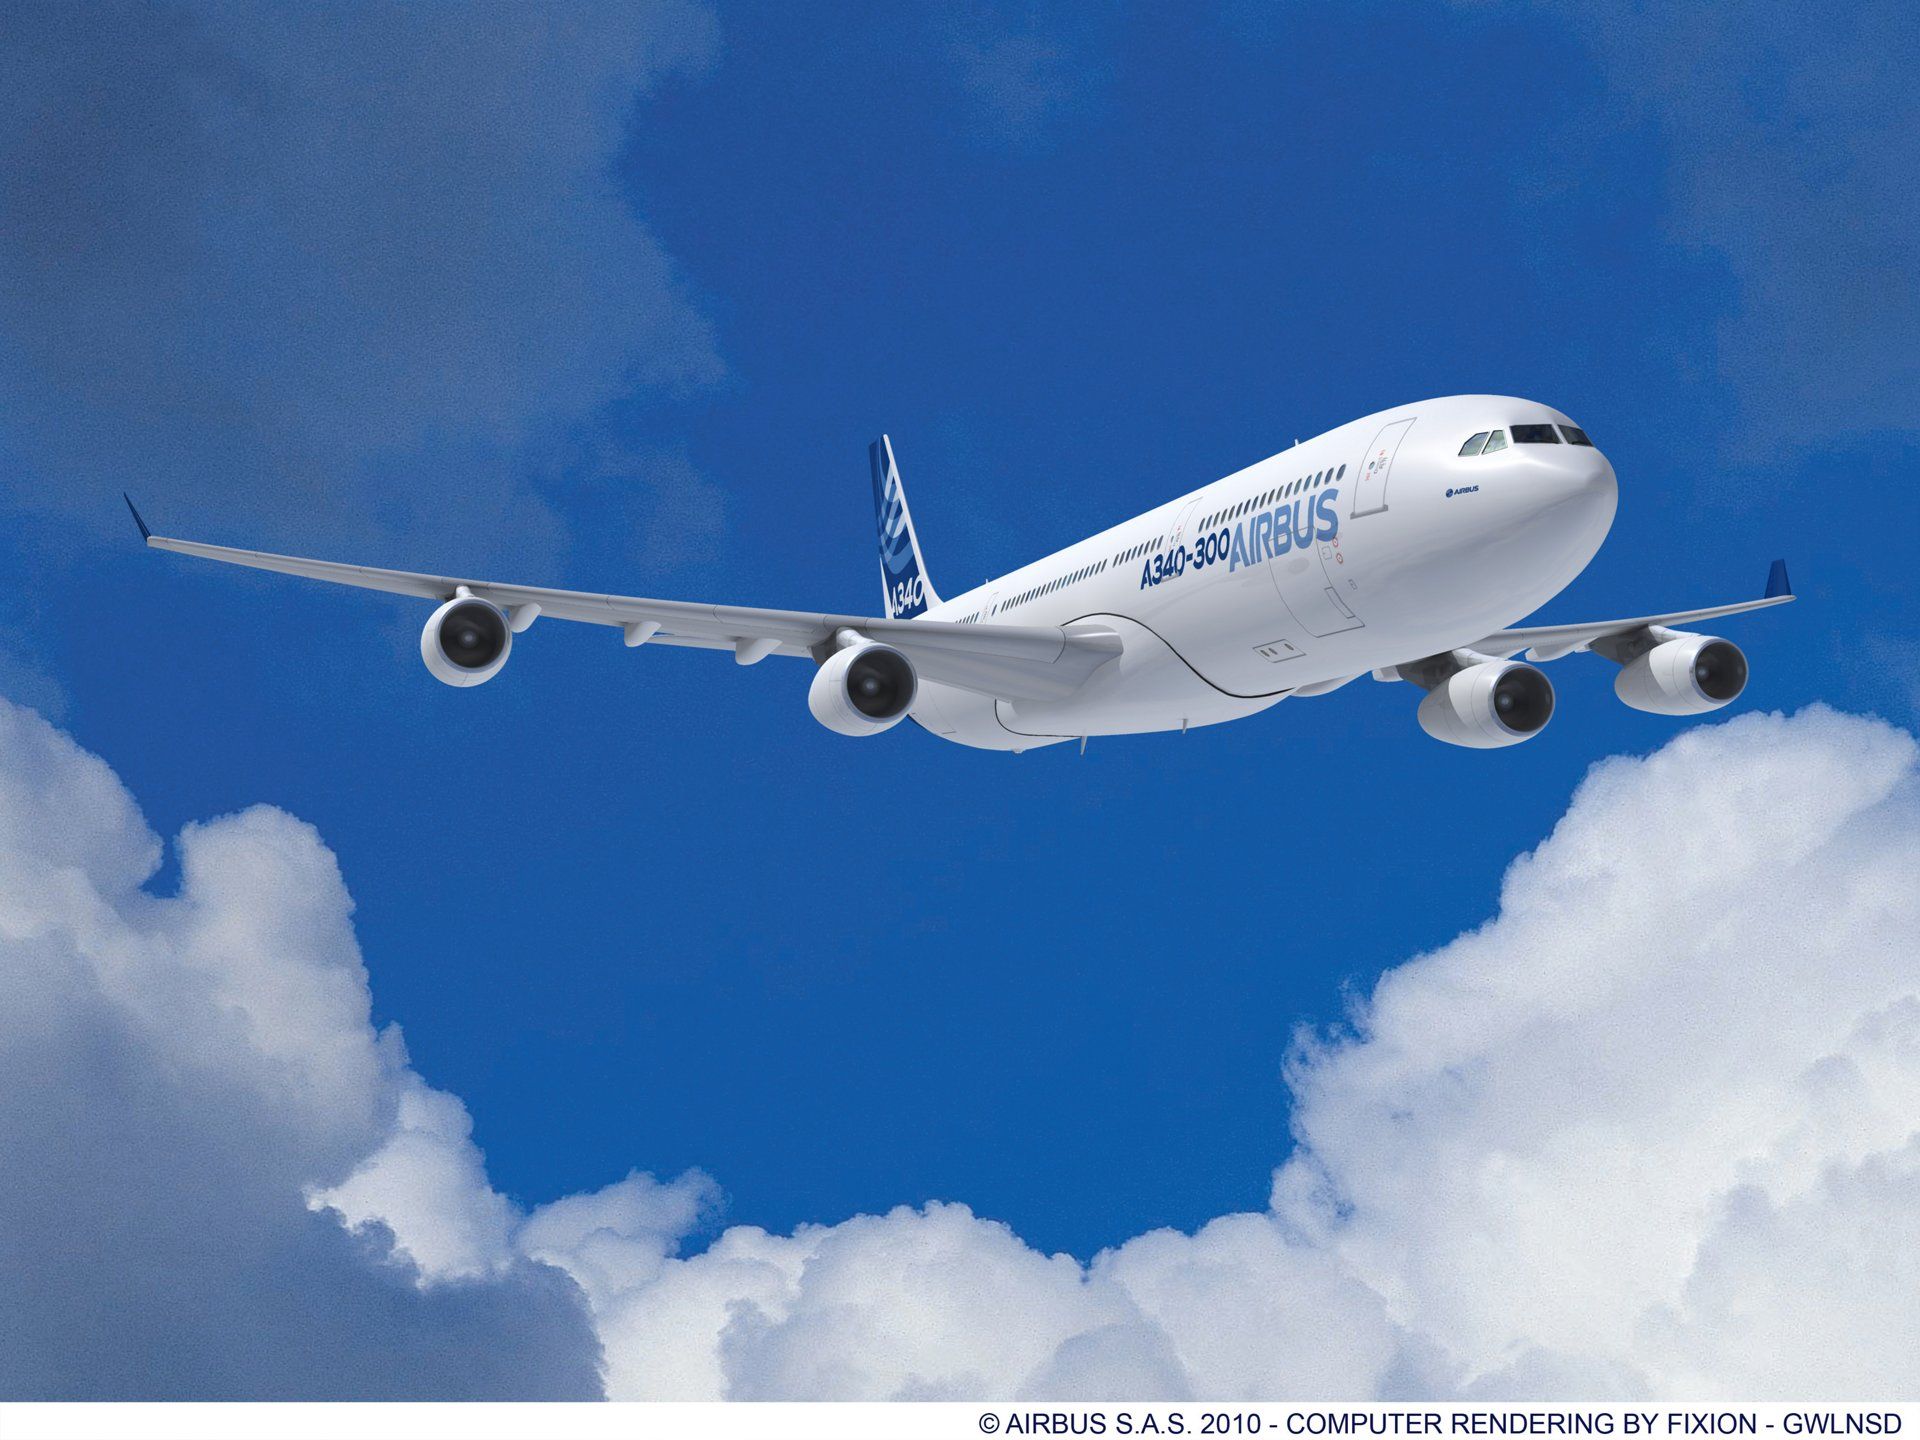 Airbus' A340 being used for testing volcanic ash detection system